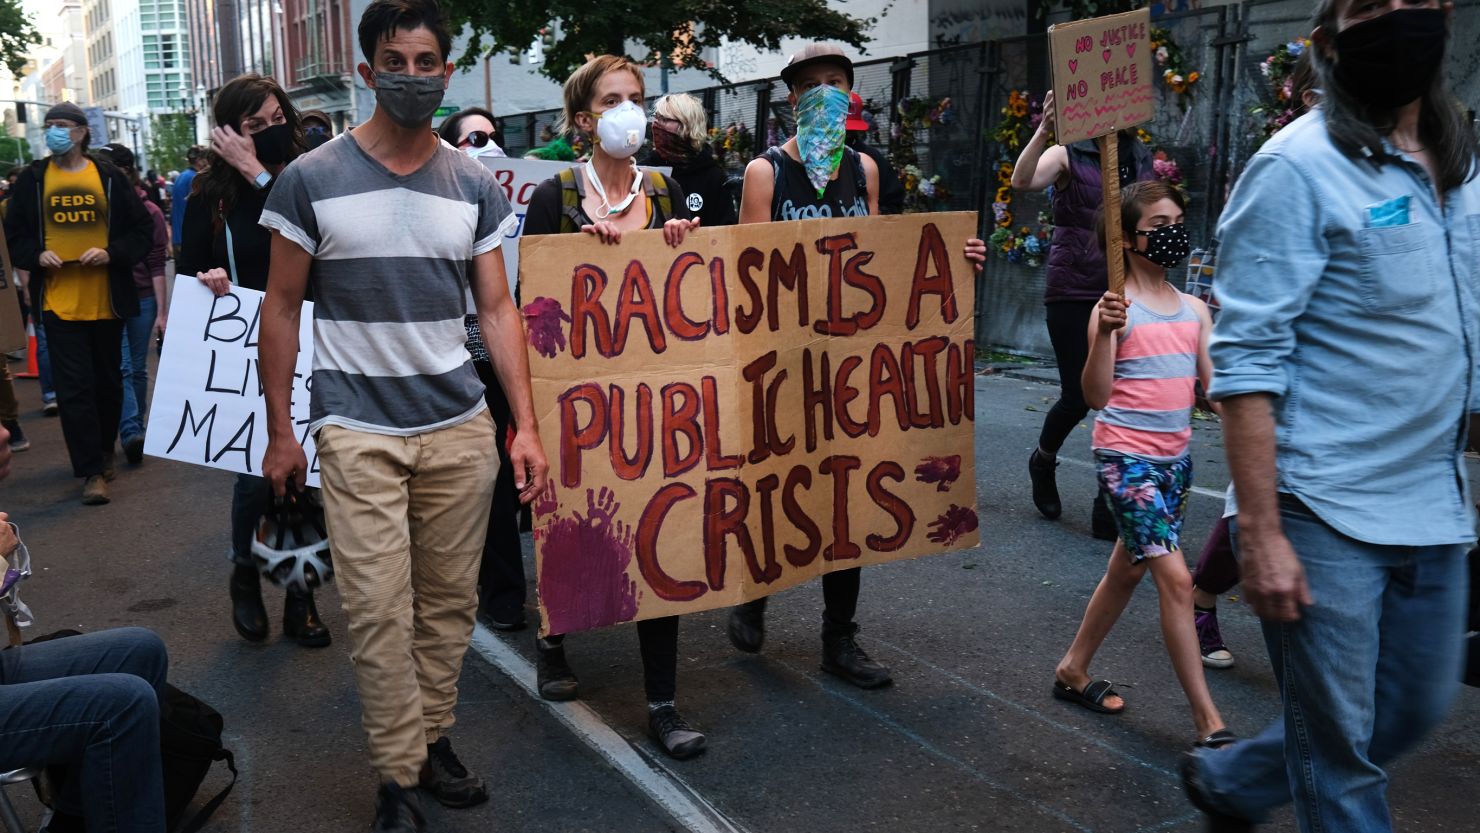 As the nation began experiencing its worst public health crisis in a generation with Covid-19, some authorities and medical experts also declared racism a crisis.